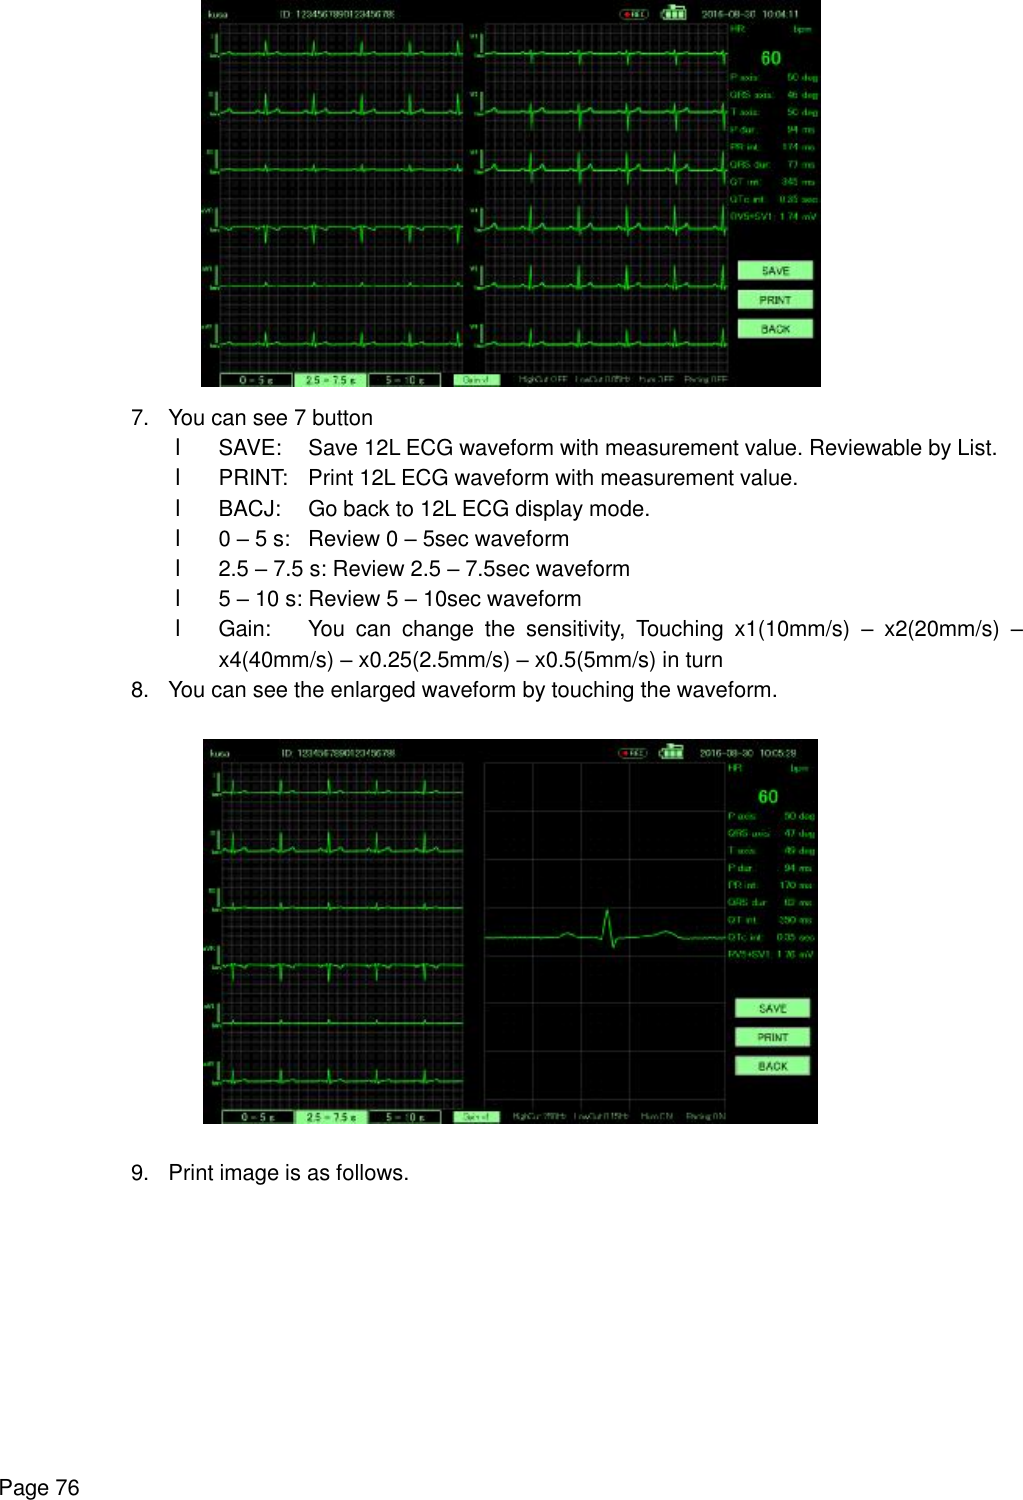    Page 76  7. You can see 7 button l SAVE: Save 12L ECG waveform with measurement value. Reviewable by List. l PRINT: Print 12L ECG waveform with measurement value. l BACJ: Go back to 12L ECG display mode. l 0 – 5 s: Review 0 – 5sec waveform l 2.5 – 7.5 s: Review 2.5 – 7.5sec waveform l 5 – 10 s: Review 5 – 10sec waveform l Gain: You can change the sensitivity, Touching x1(10mm/s)  – x2(20mm/s)  – x4(40mm/s) – x0.25(2.5mm/s) – x0.5(5mm/s) in turn 8. You can see the enlarged waveform by touching the waveform.    9. Print image is as follows. 